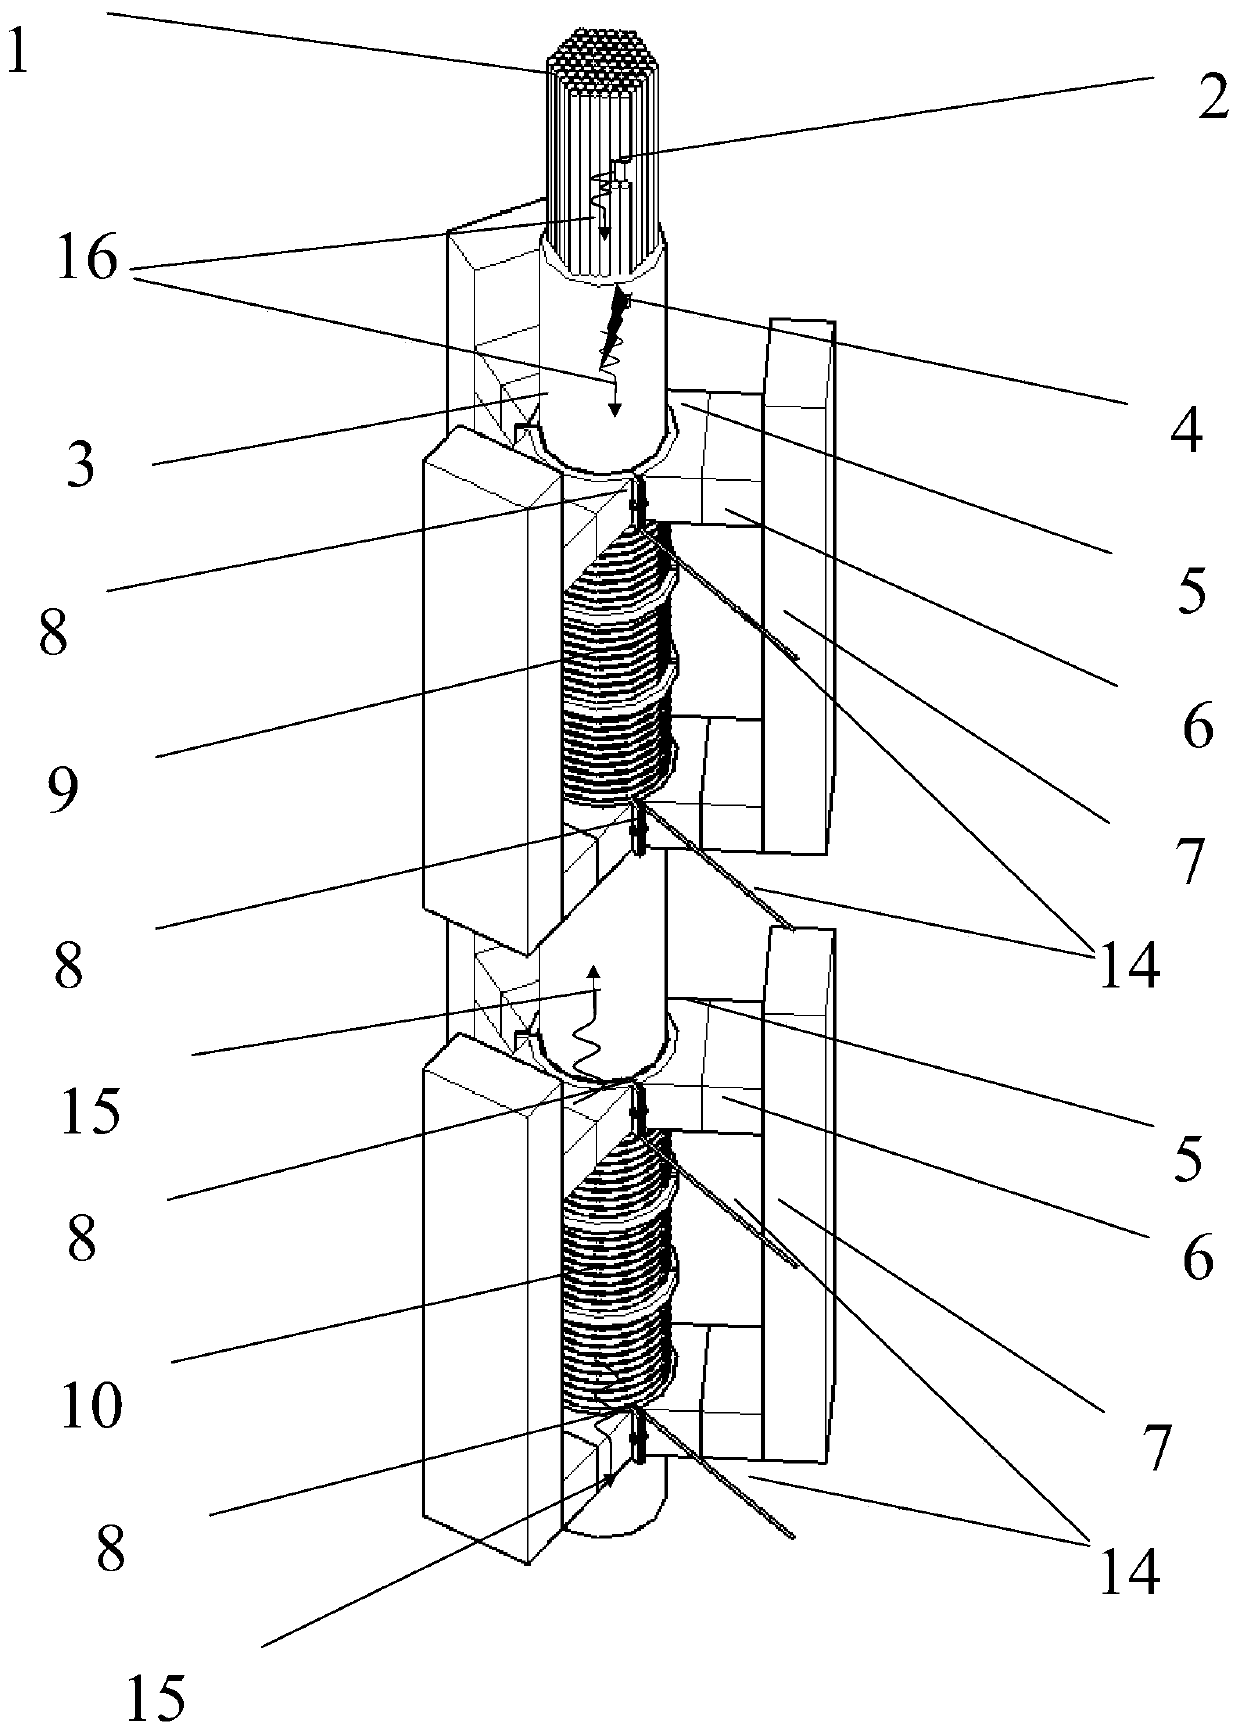 Bridge suspender damage and wire breakage detection device based on magnetostriction method